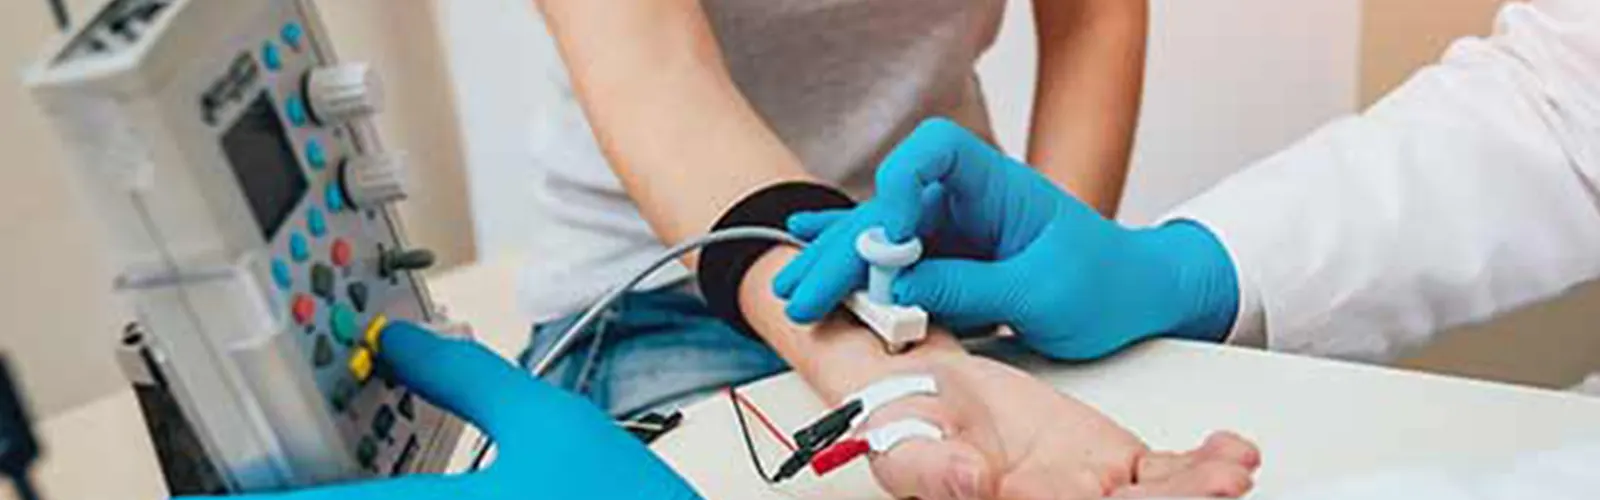 Which Diseases can be Diagnosed Using EMG and NCV?